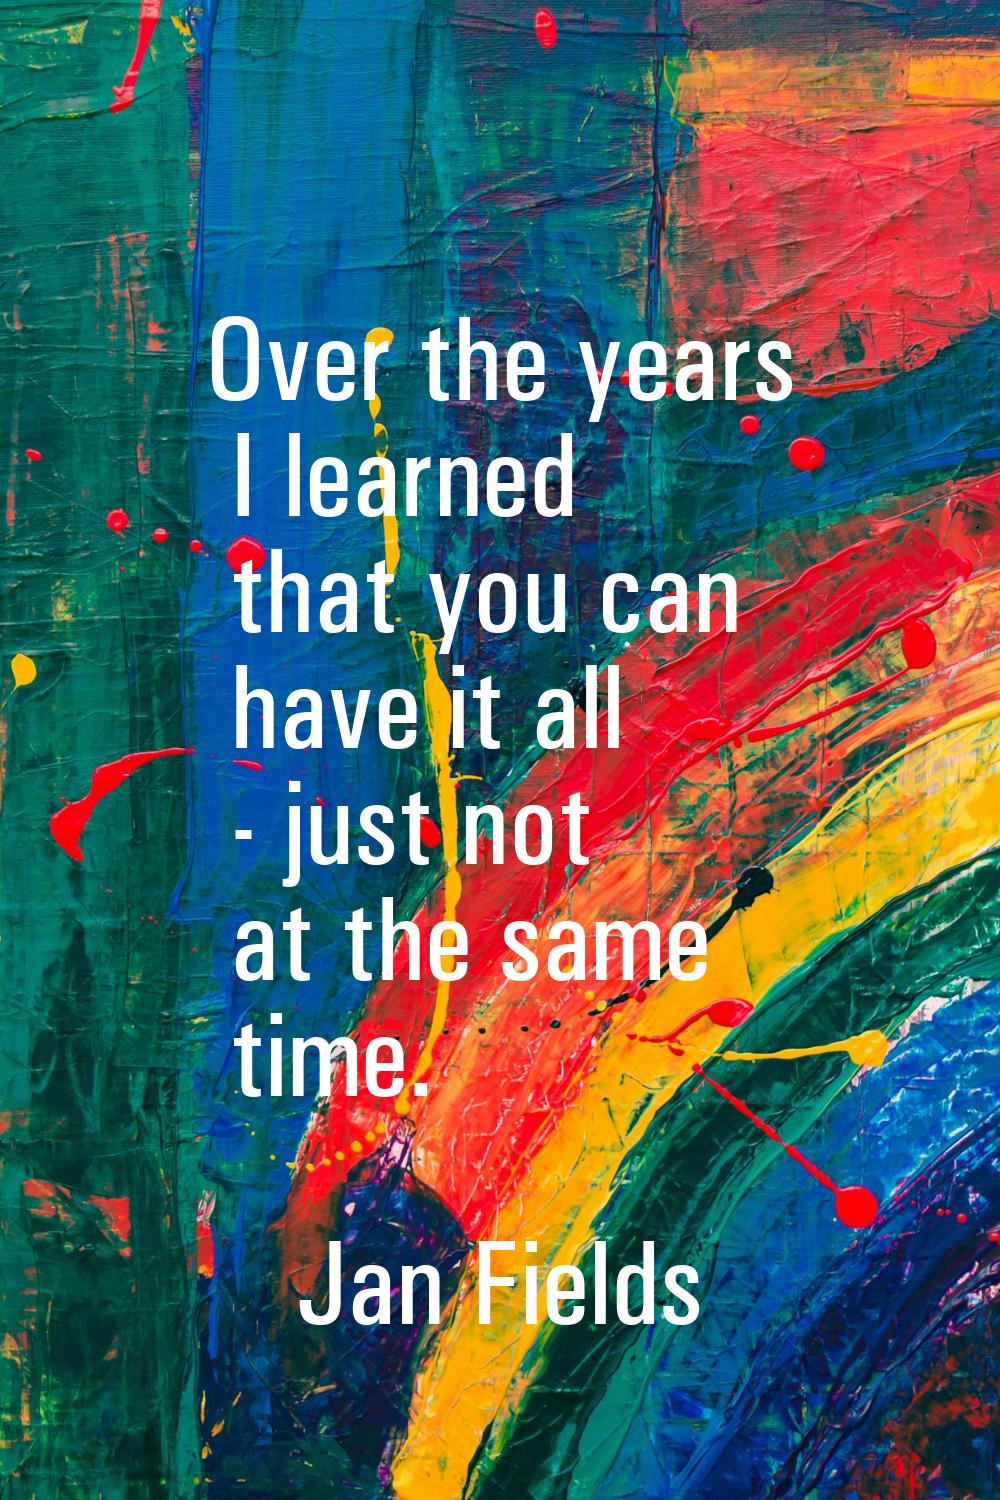 Over the years I learned that you can have it all - just not at the same time.